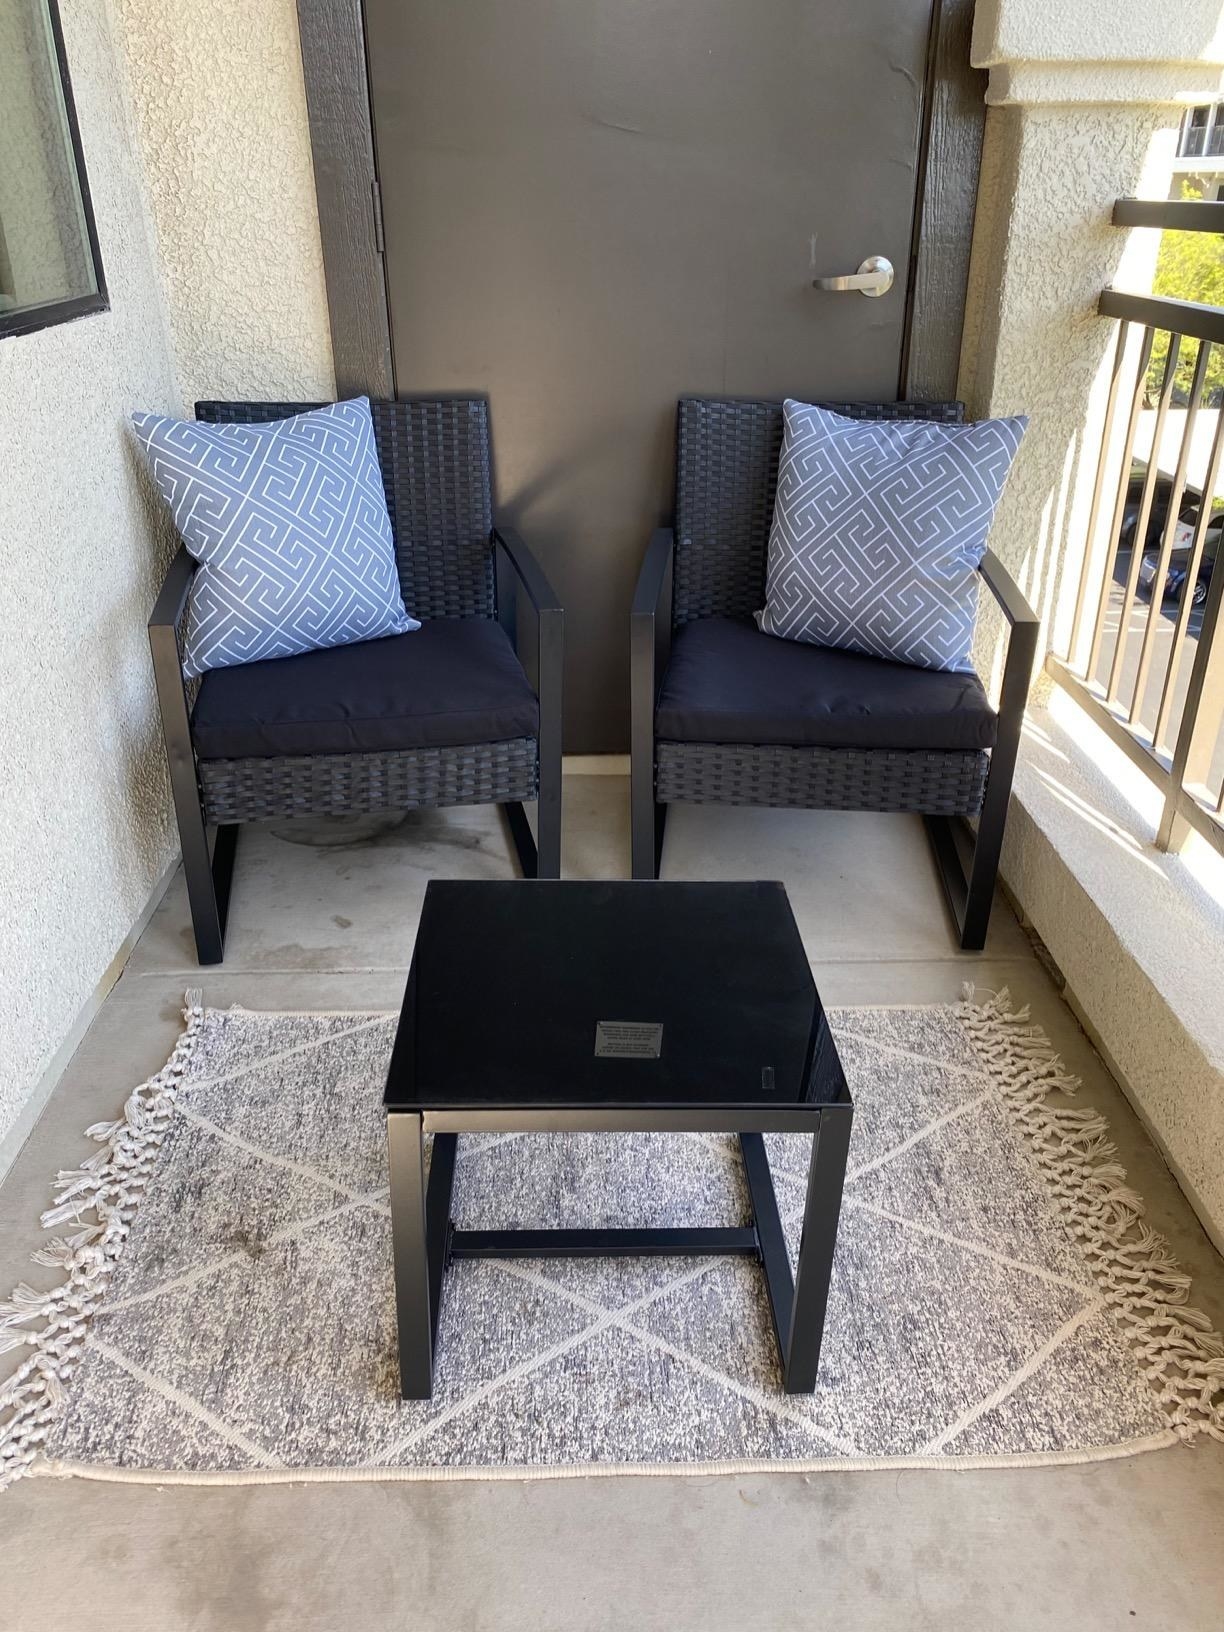 reviewer photo of a three-piece patio set including two rattan chairs with black cushions and a small table with glass top